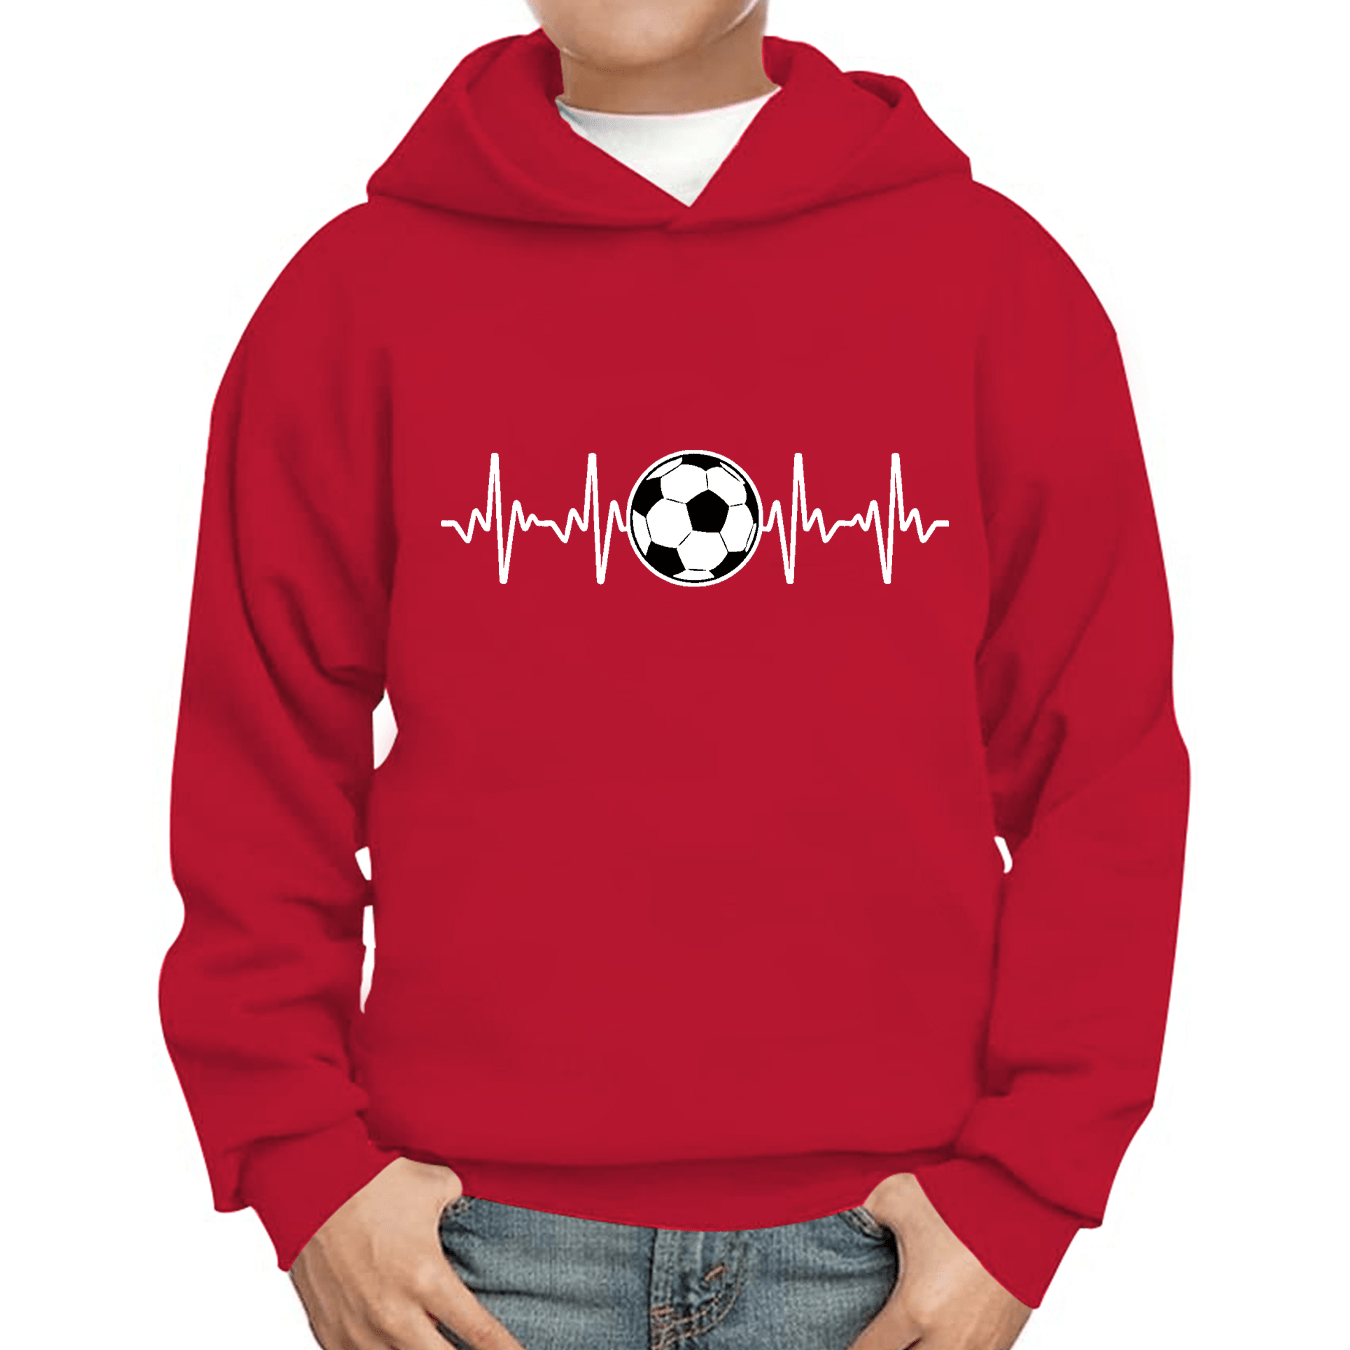 

Football Heartbeat Print Hoodies For Boys - Casual Graphic Design With Stretch Fabric For Comfortable Autumn/winter Wear